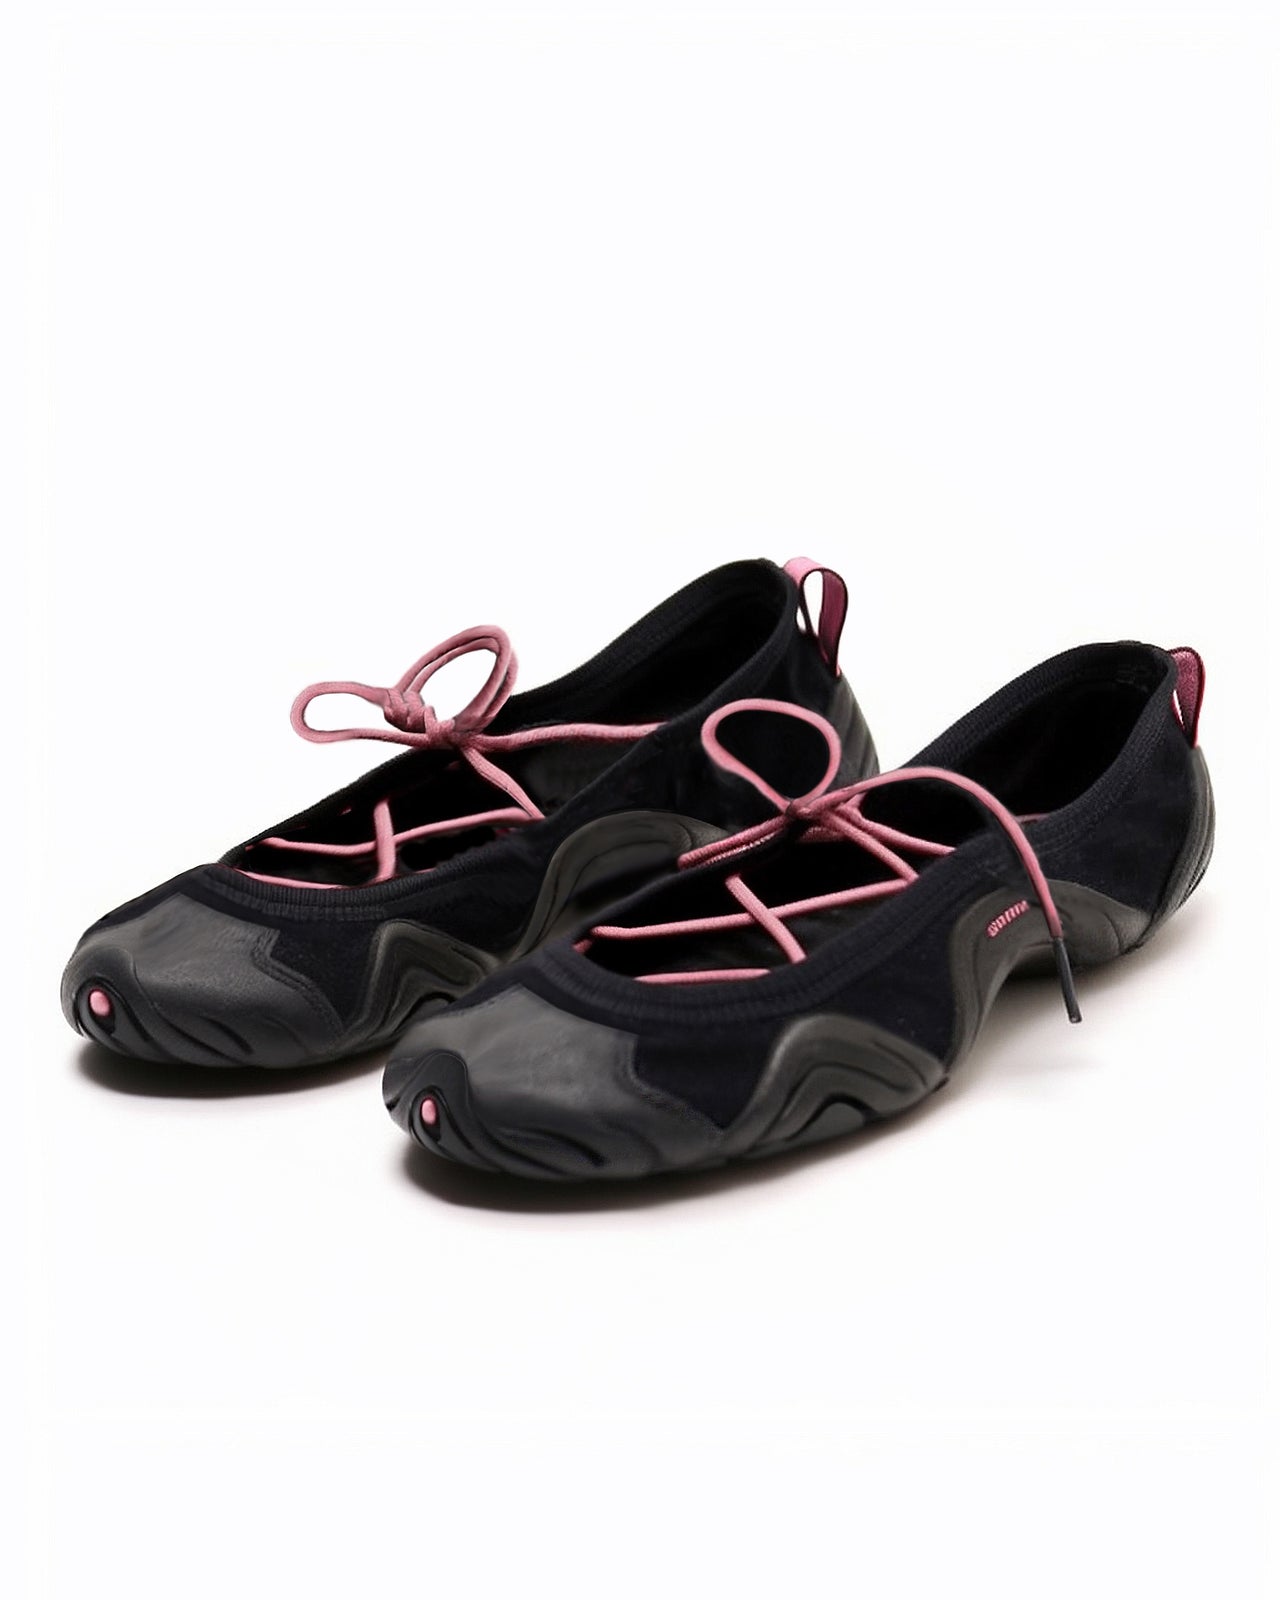 Caitlin Lace-up Ballerina Sneakers  - Black